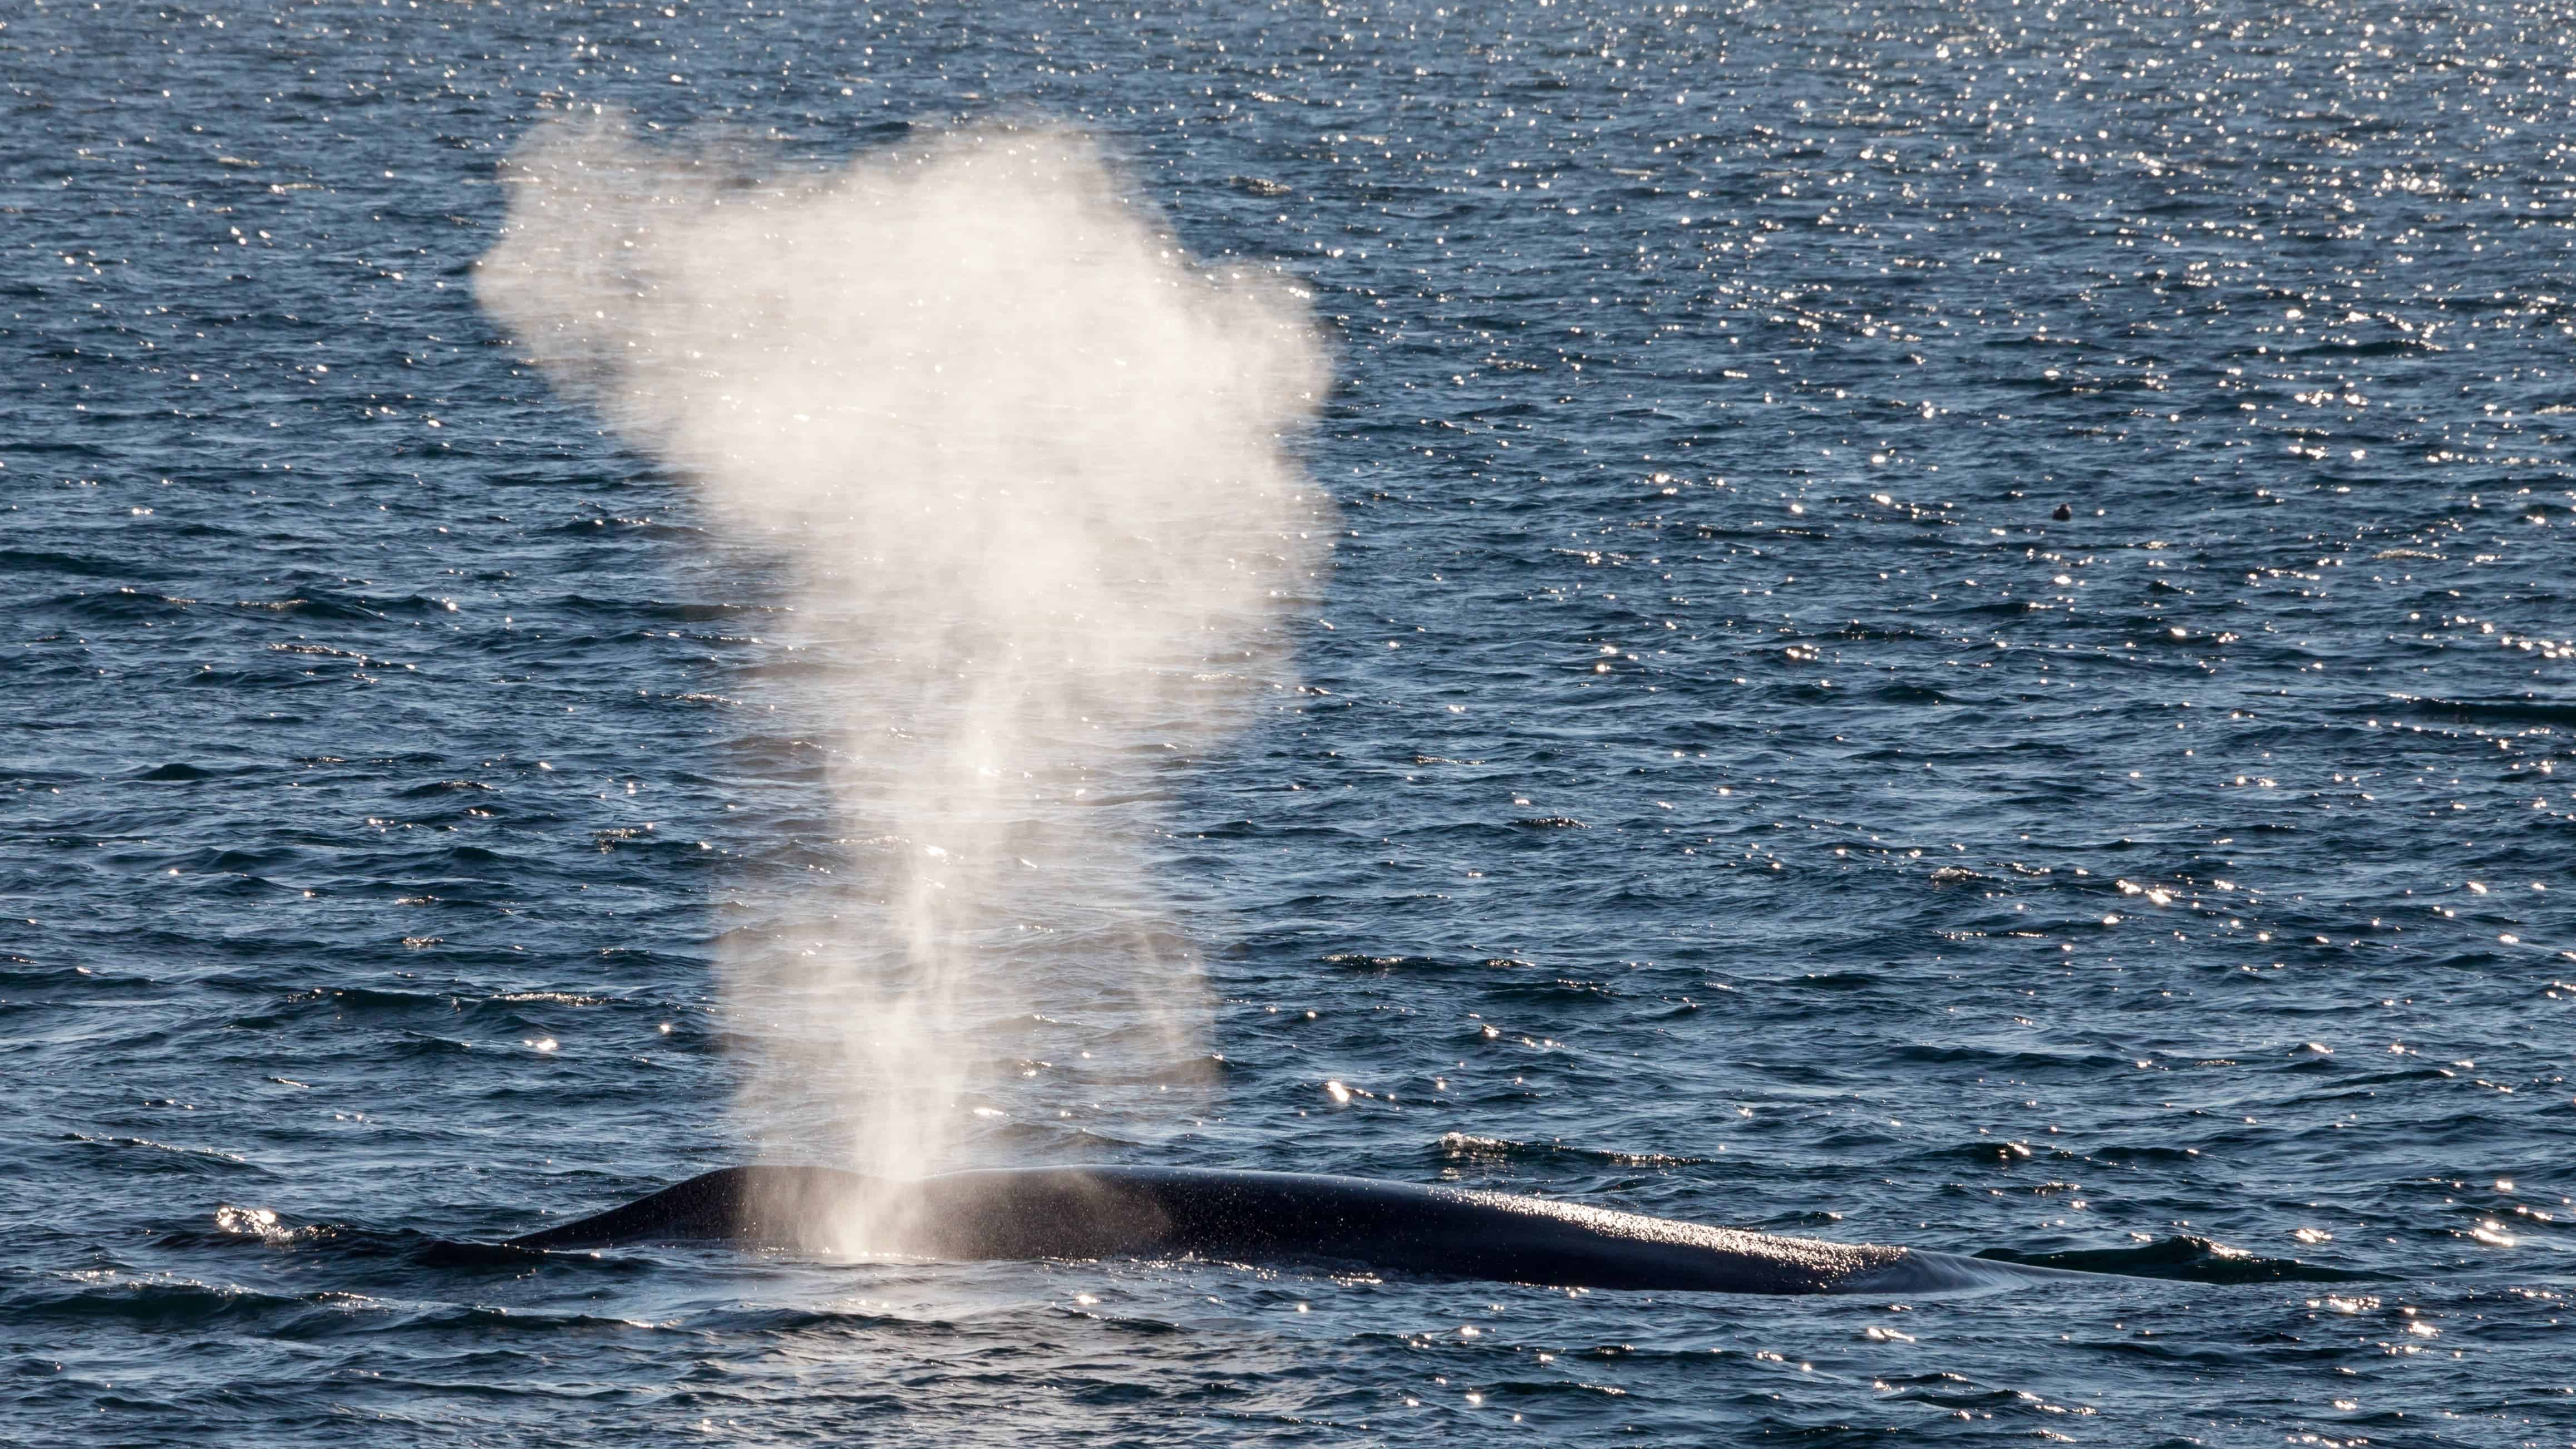 Blue whale in the Arctic waters -- probably looking for some krill to eat. Image credits: AWeith.